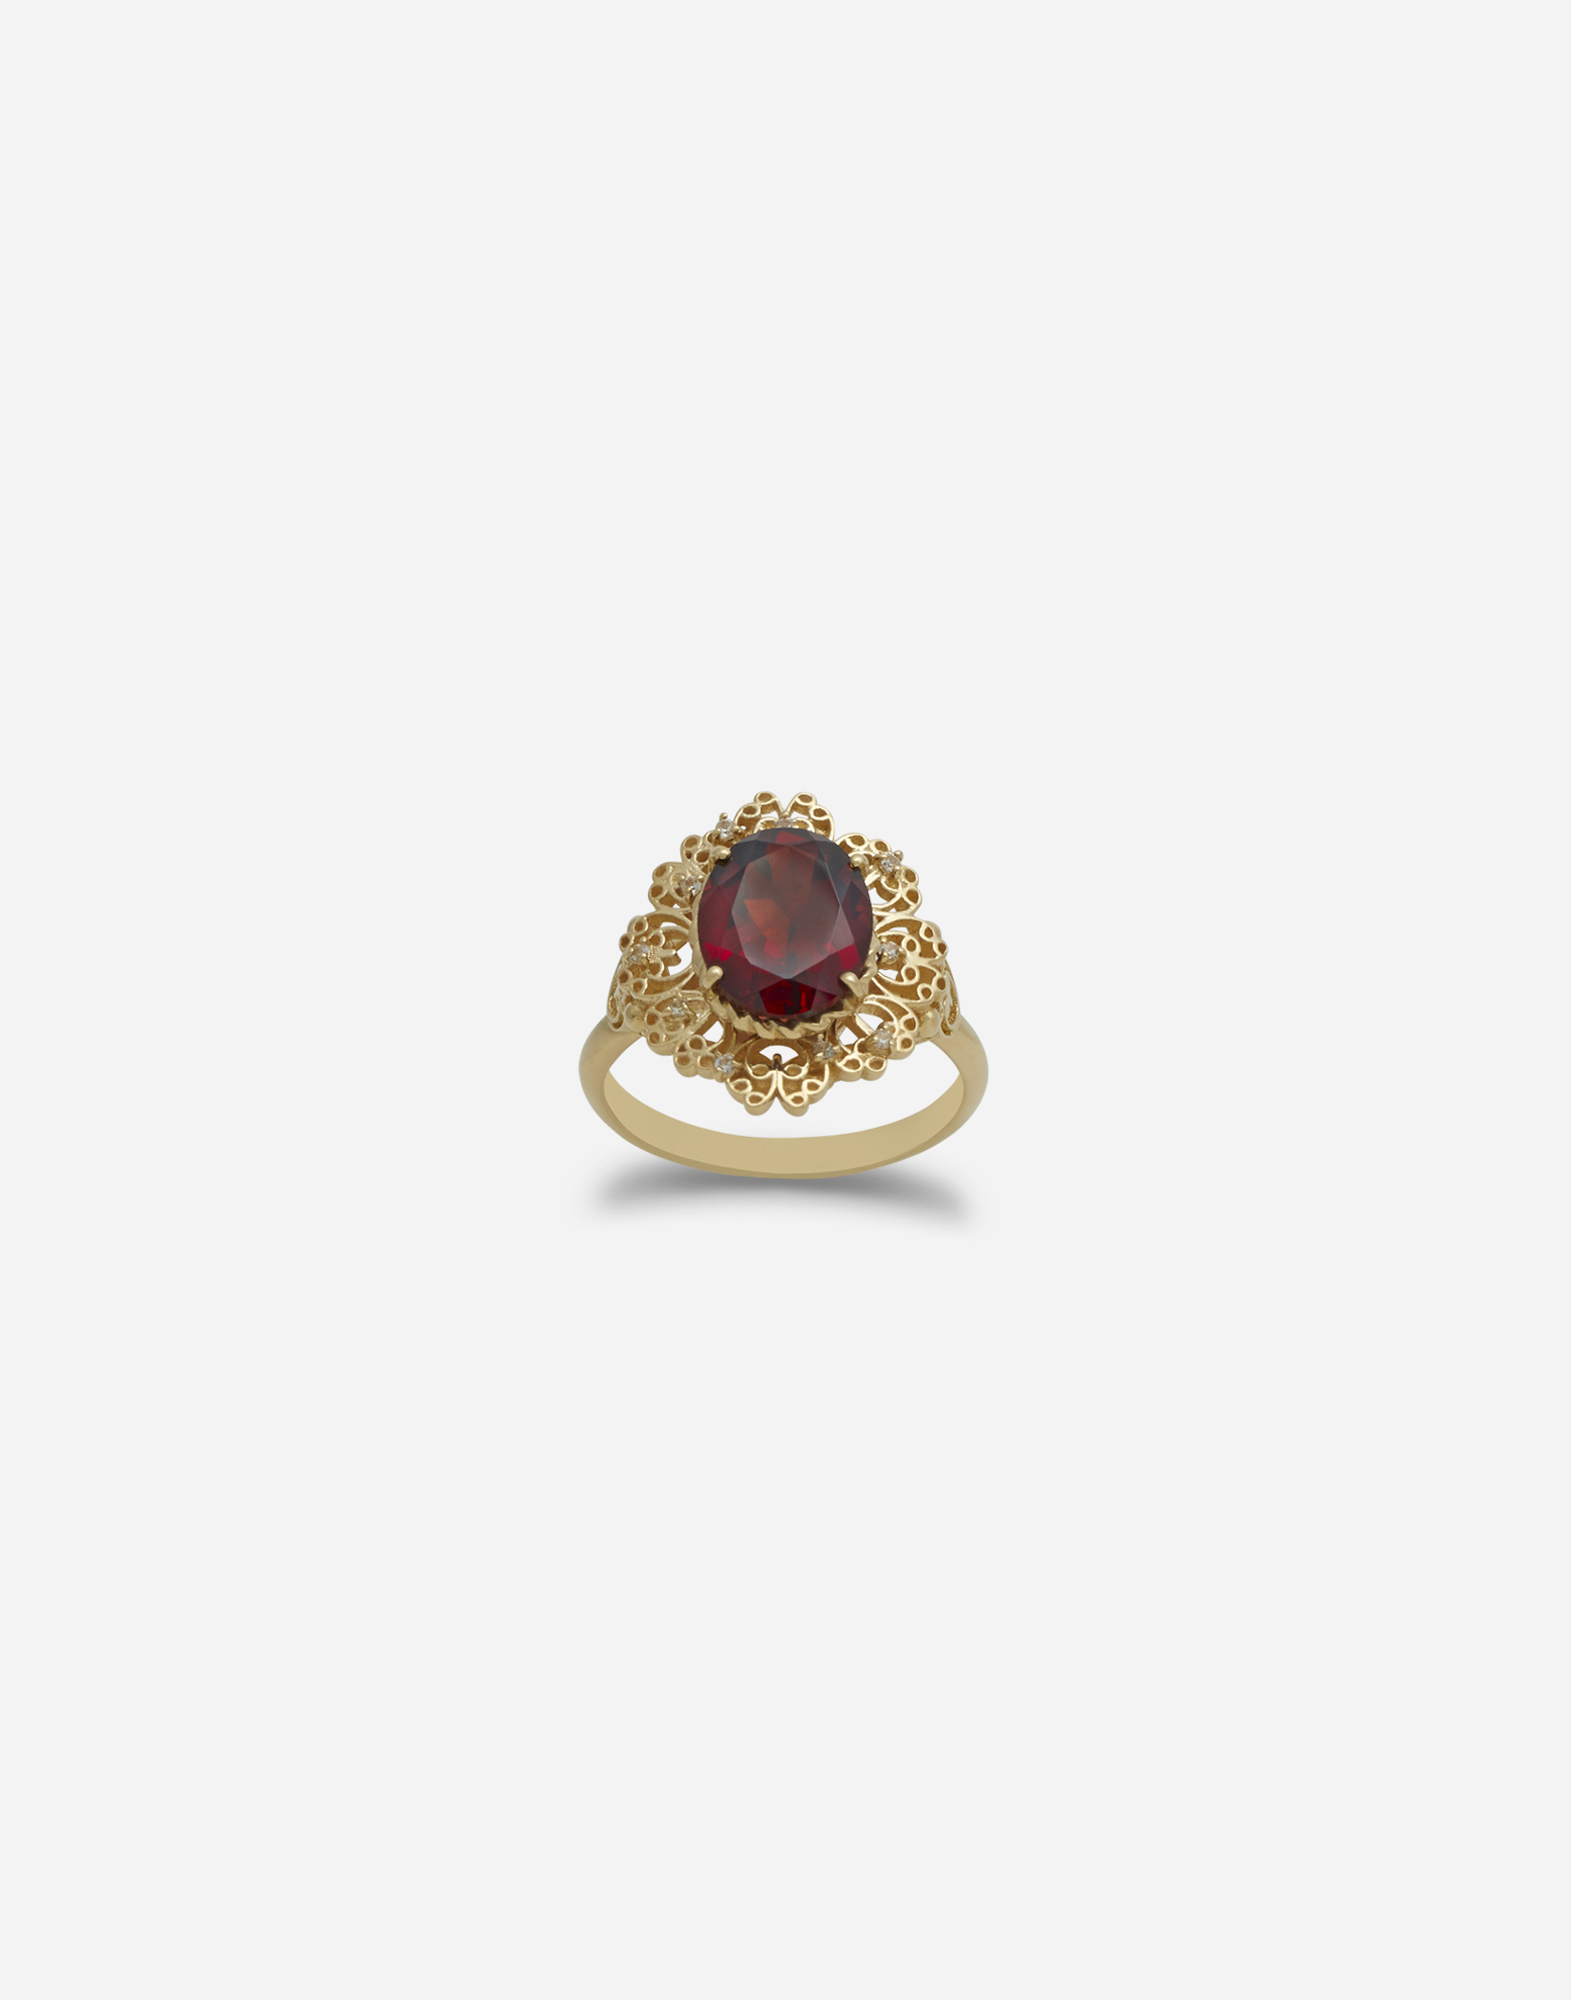 Barocco ring in yellow gold and rhodolite garnet in Gold